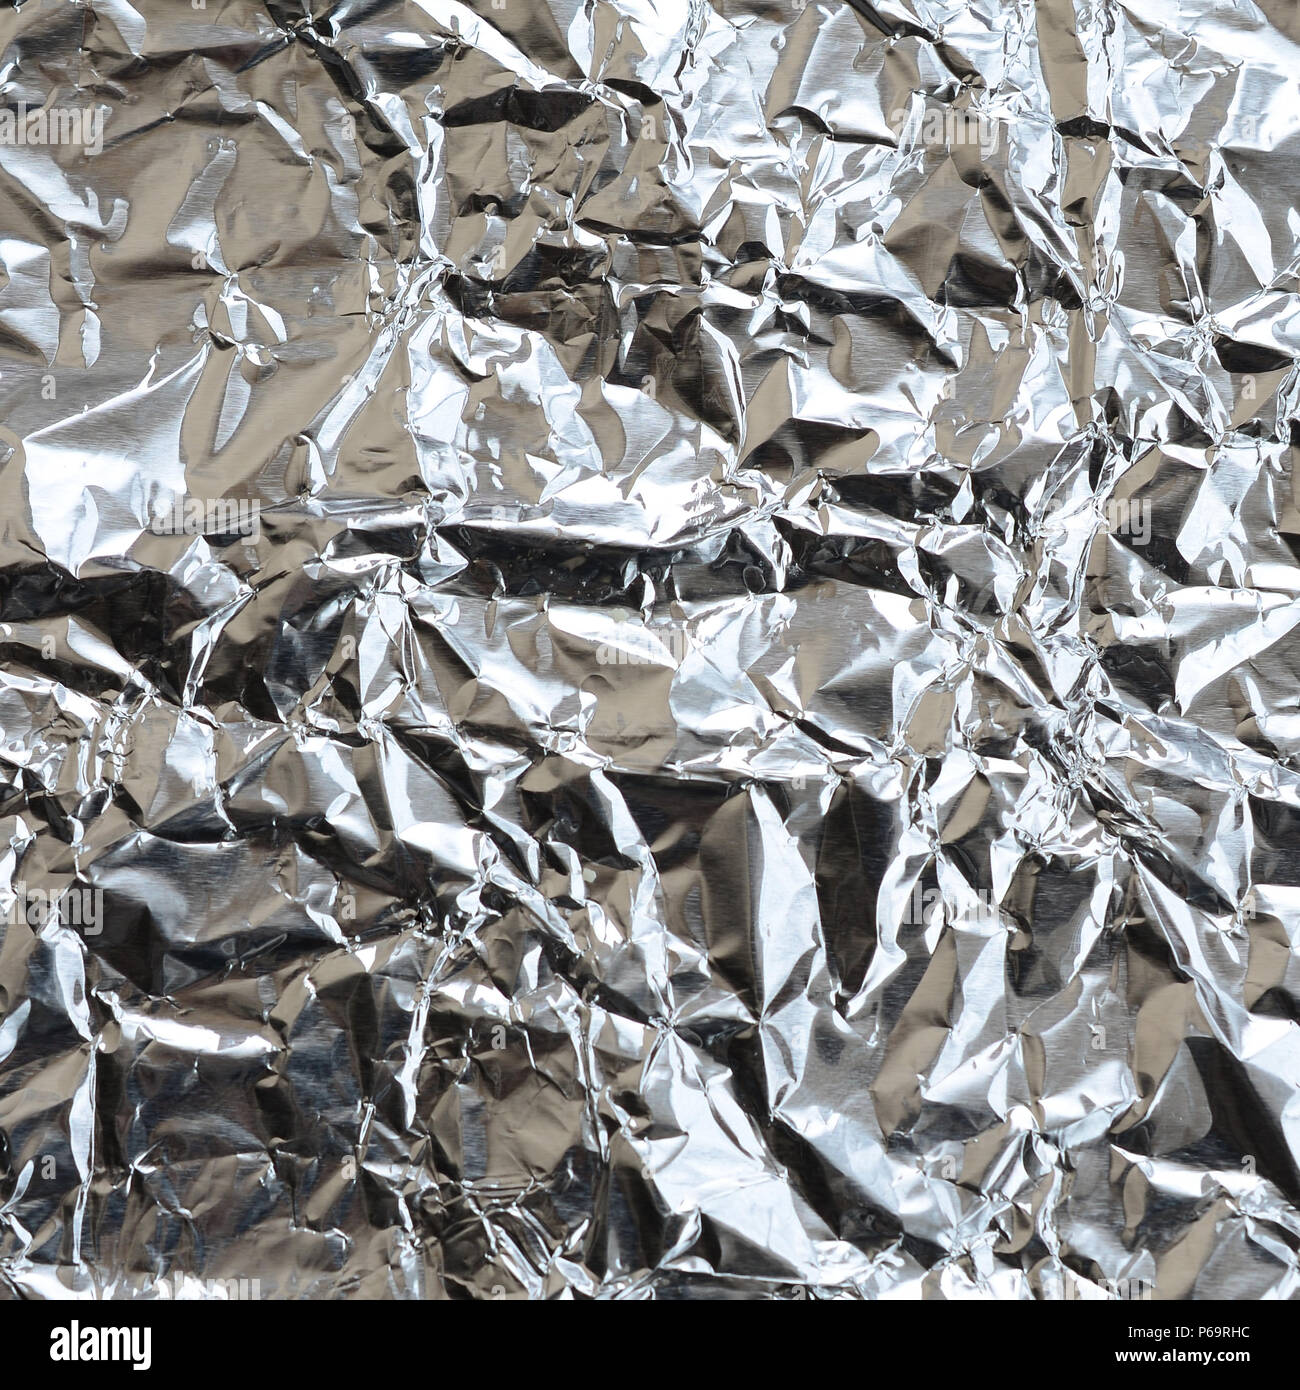 https://c8.alamy.com/comp/P69RHC/thin-wrinkled-sheet-of-crushed-tin-aluminum-silver-foil-background-with-shiny-crumpled-surface-for-texture-P69RHC.jpg